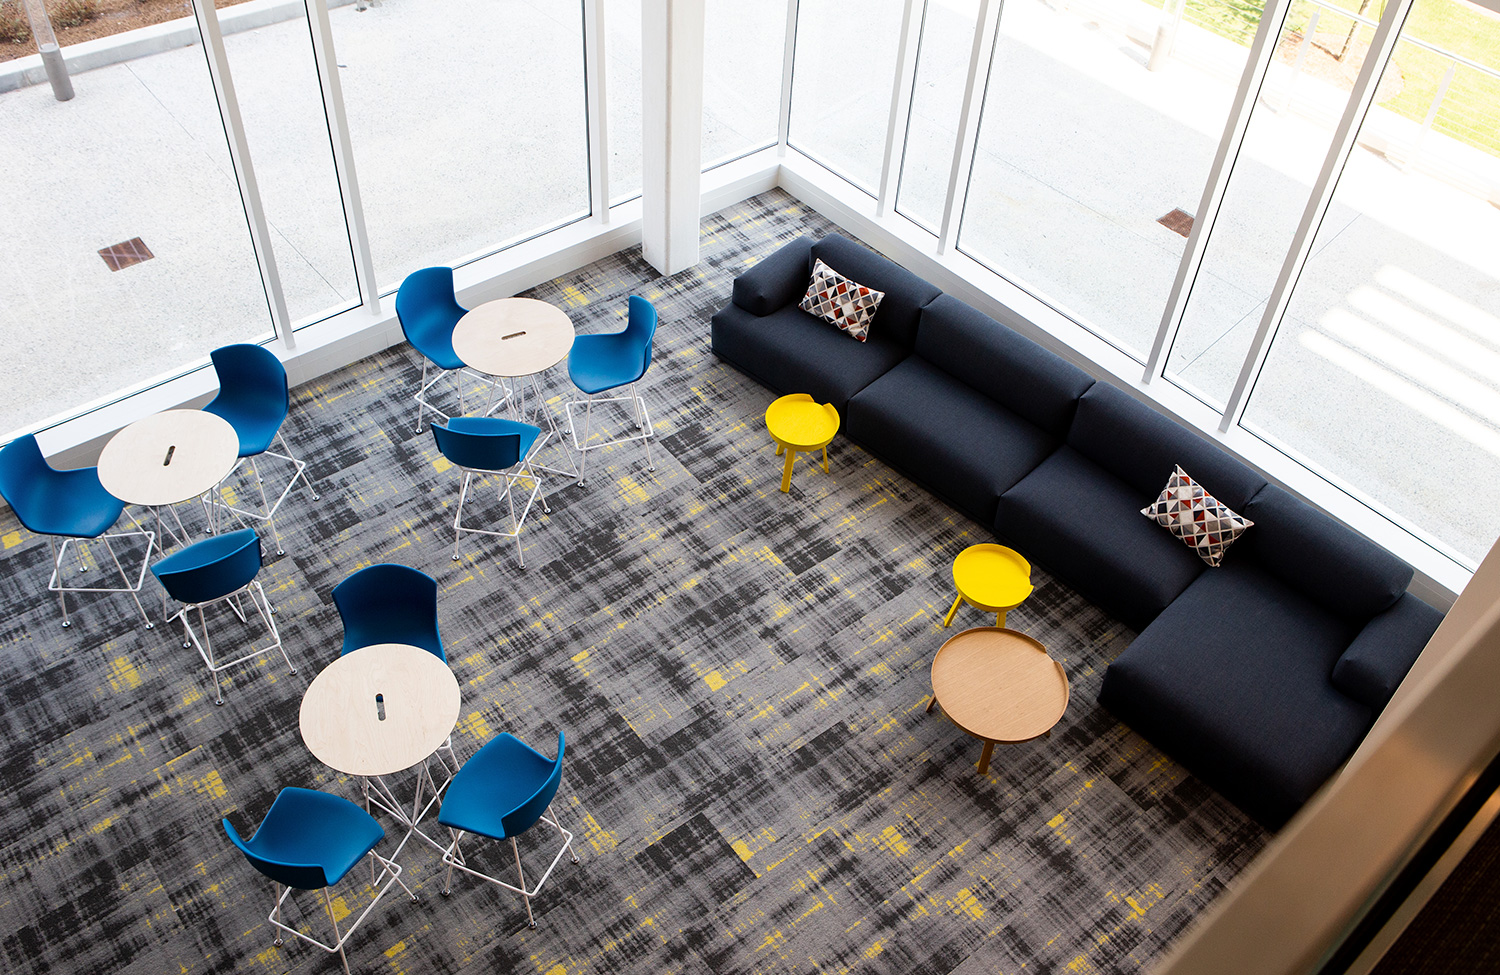 Knoll Education Community Spaces